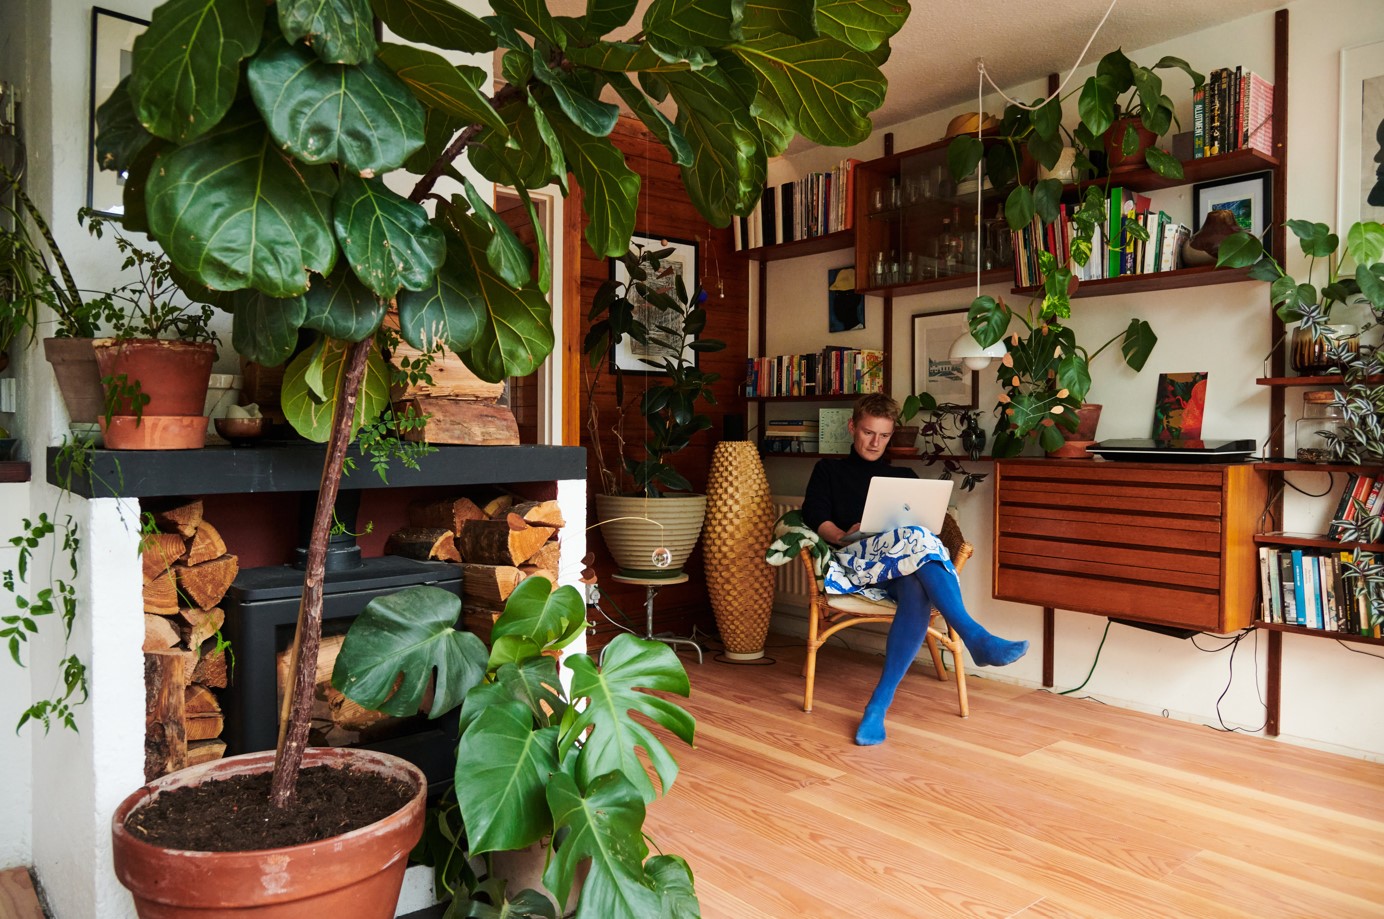 A fireplace surrounded by plants and a person sat at a laptop in a chair